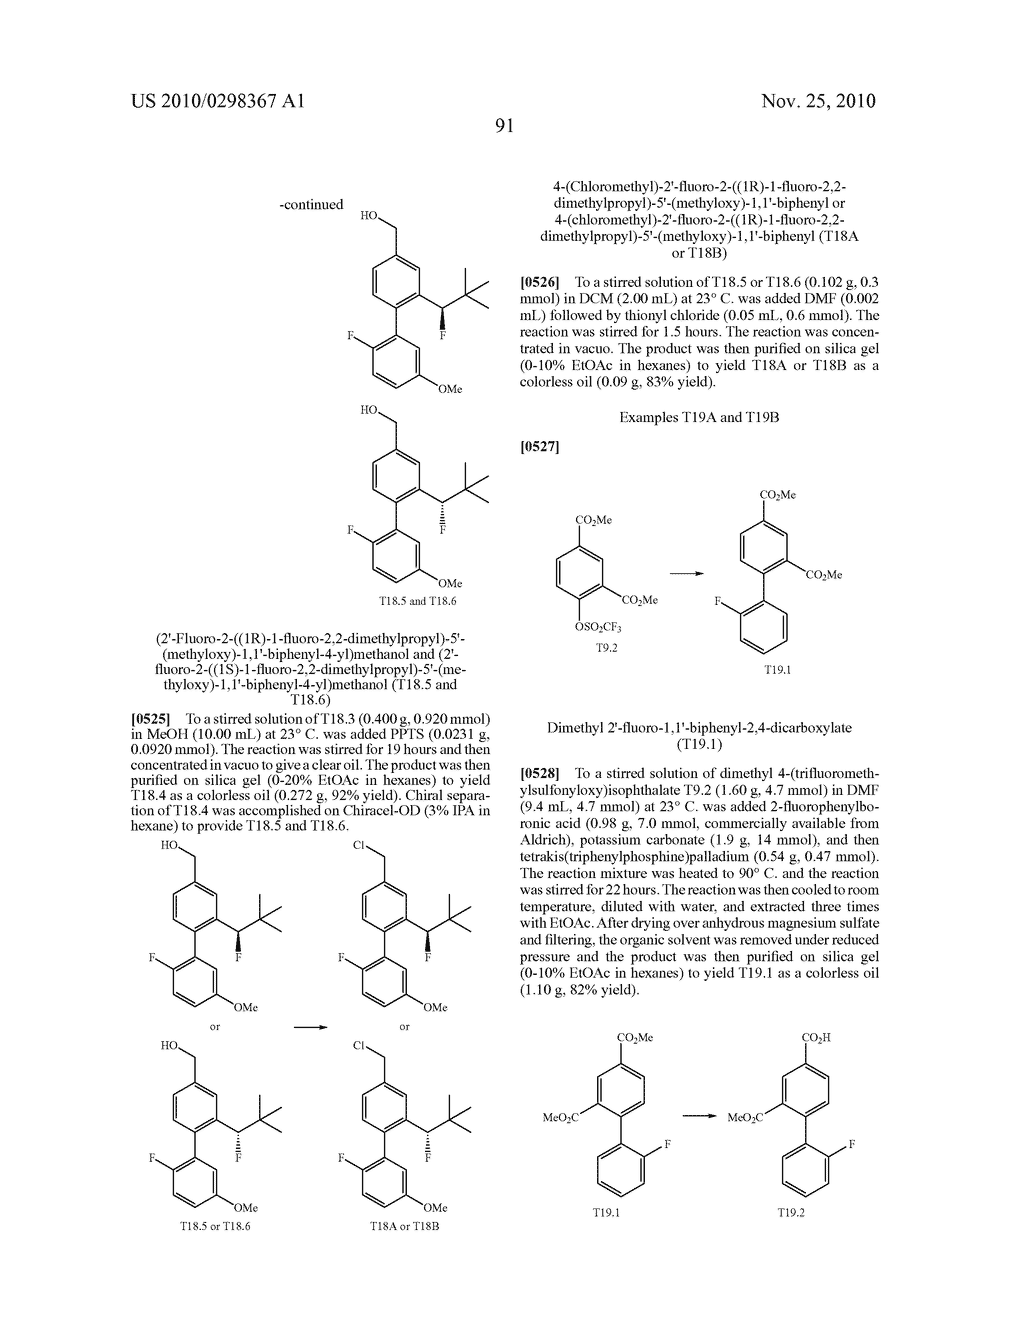 Conformationally Constrained Carboxylic Acid Derivatives Useful for Treating Metabolic Disorders - diagram, schematic, and image 93